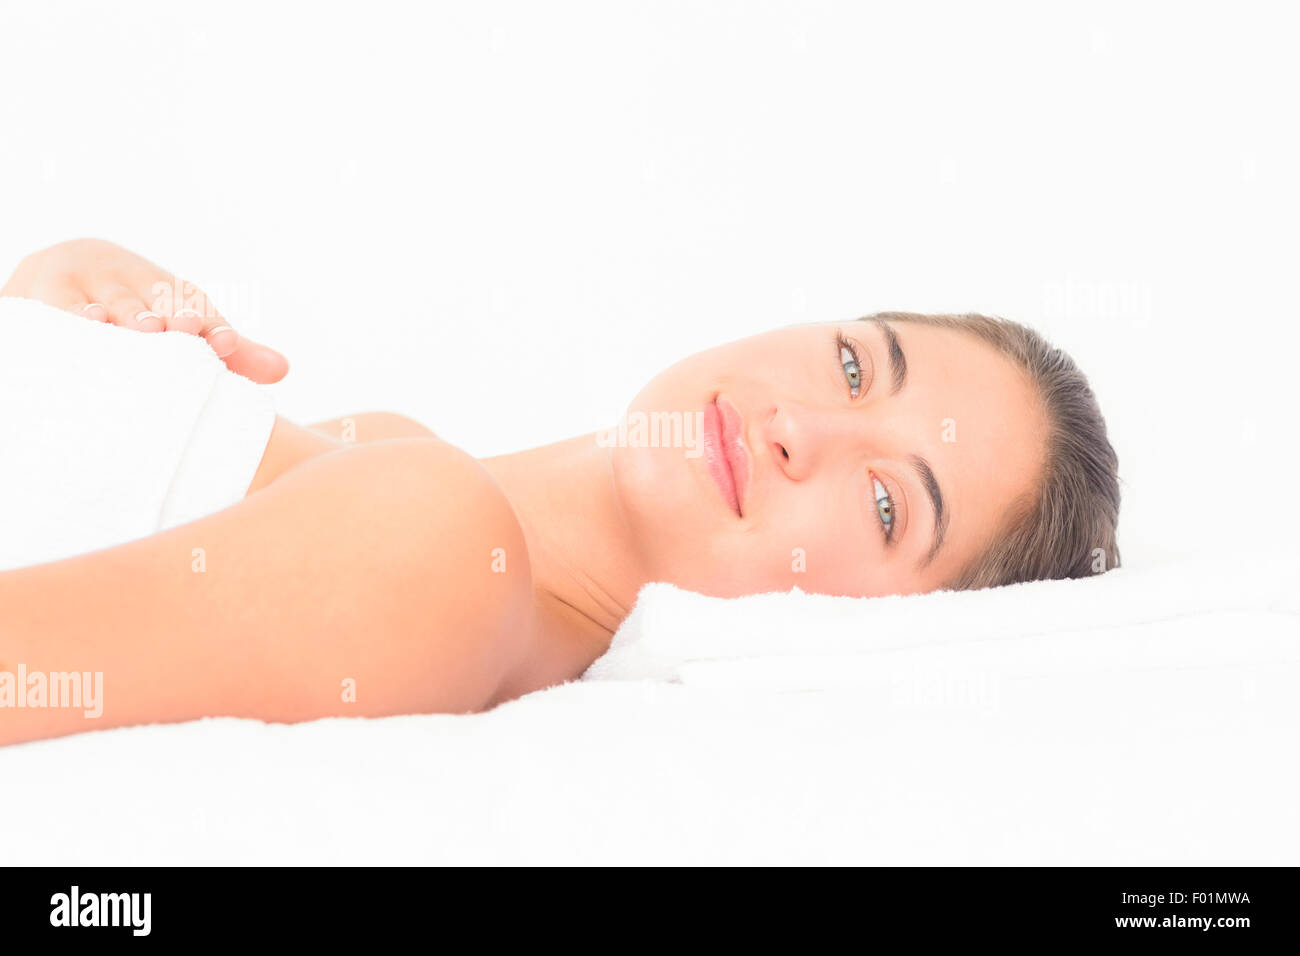 Woman who practice natural medicine Stock Photo